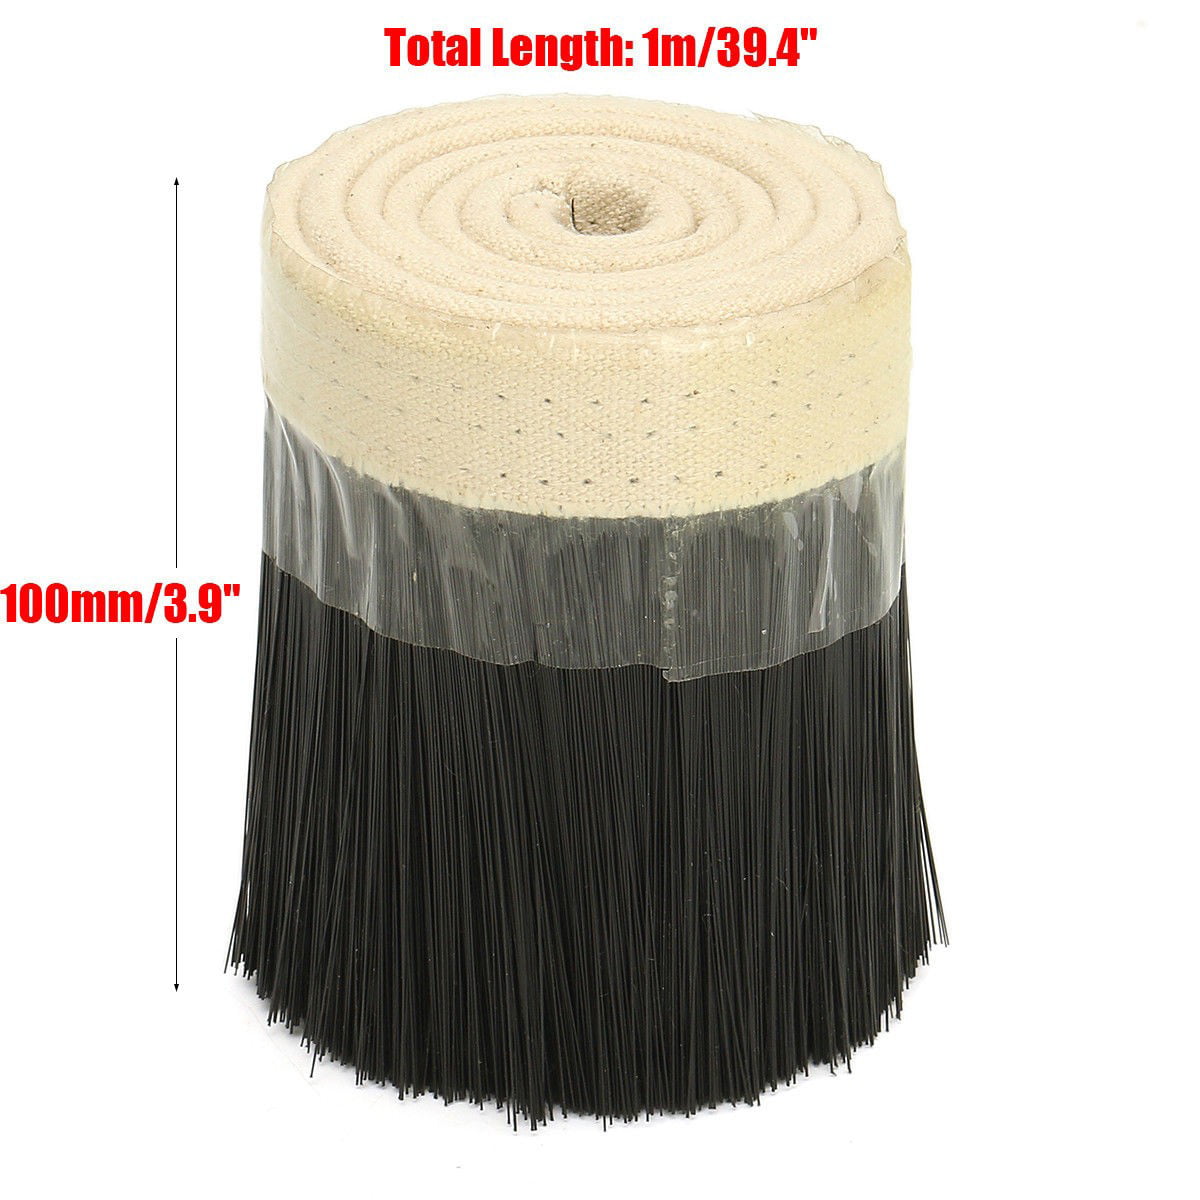 1m x 70mm Dust Cover Brush,70mm Brush Vacuum Cleaner Engraving Machine Dust Cover for CNC Router Spindle Motor